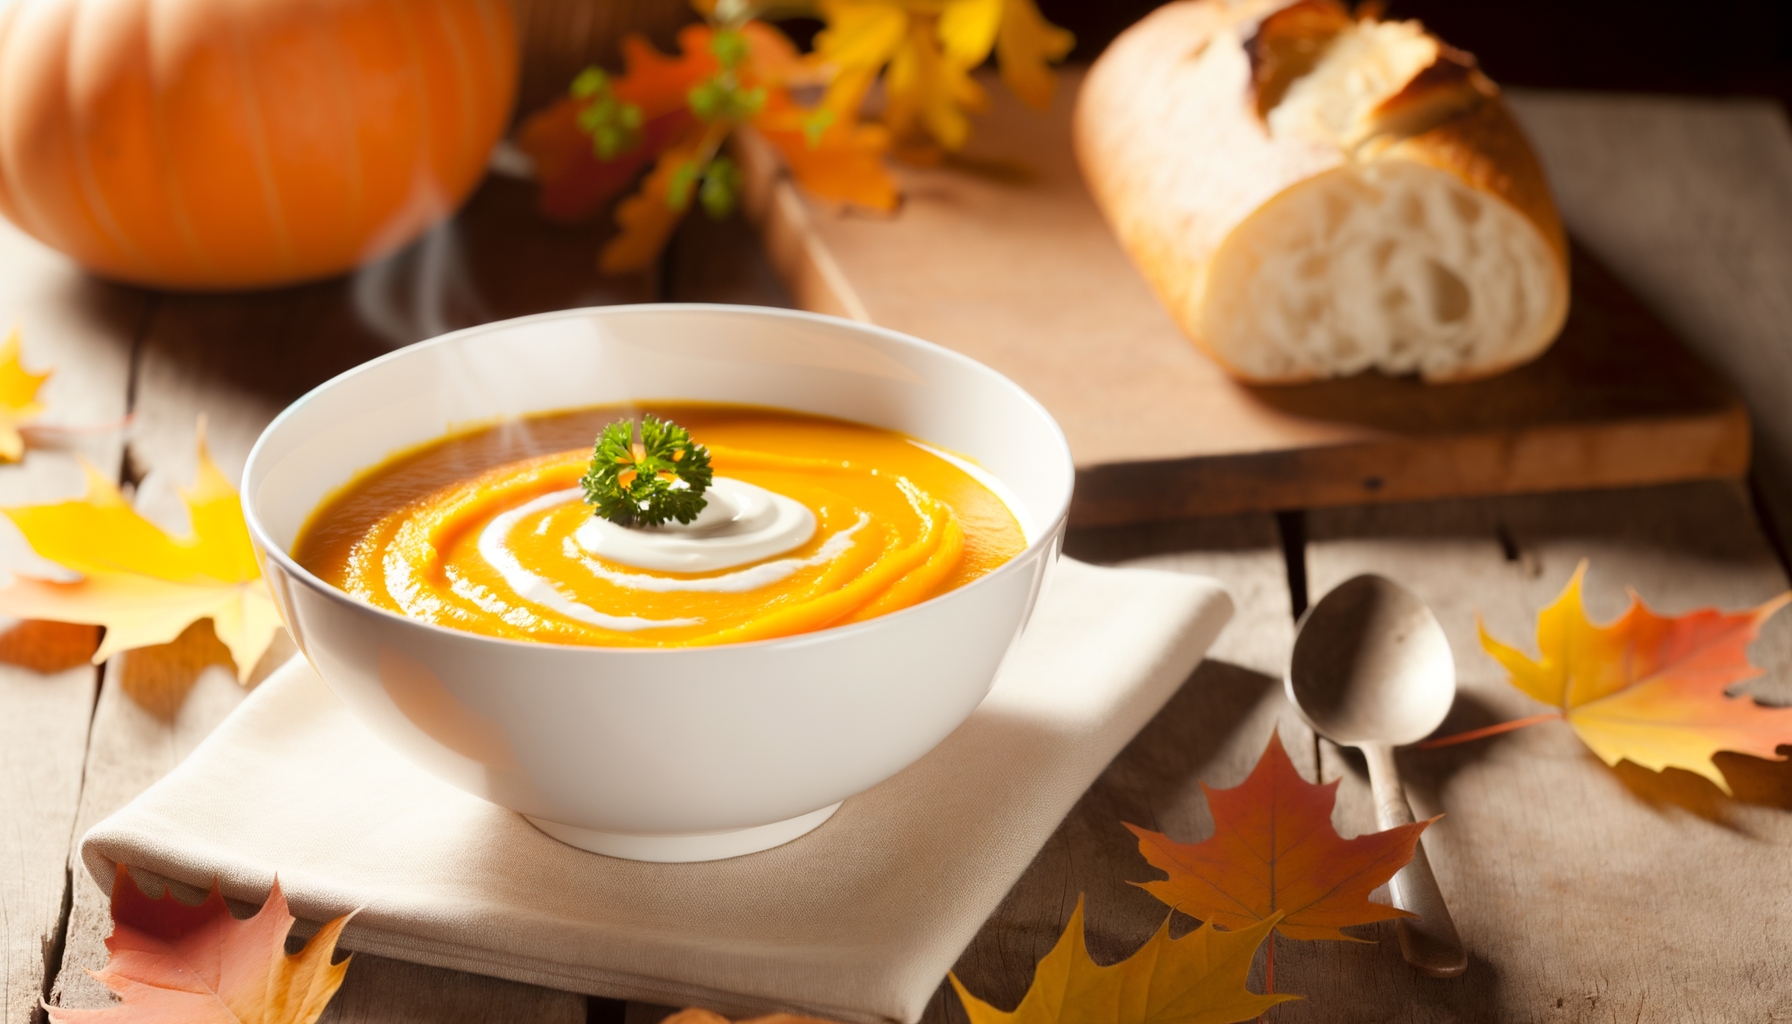 Creamy butternut squash soup on a rustic table with autumn leaves, a dollop of cream, and crusty bread.